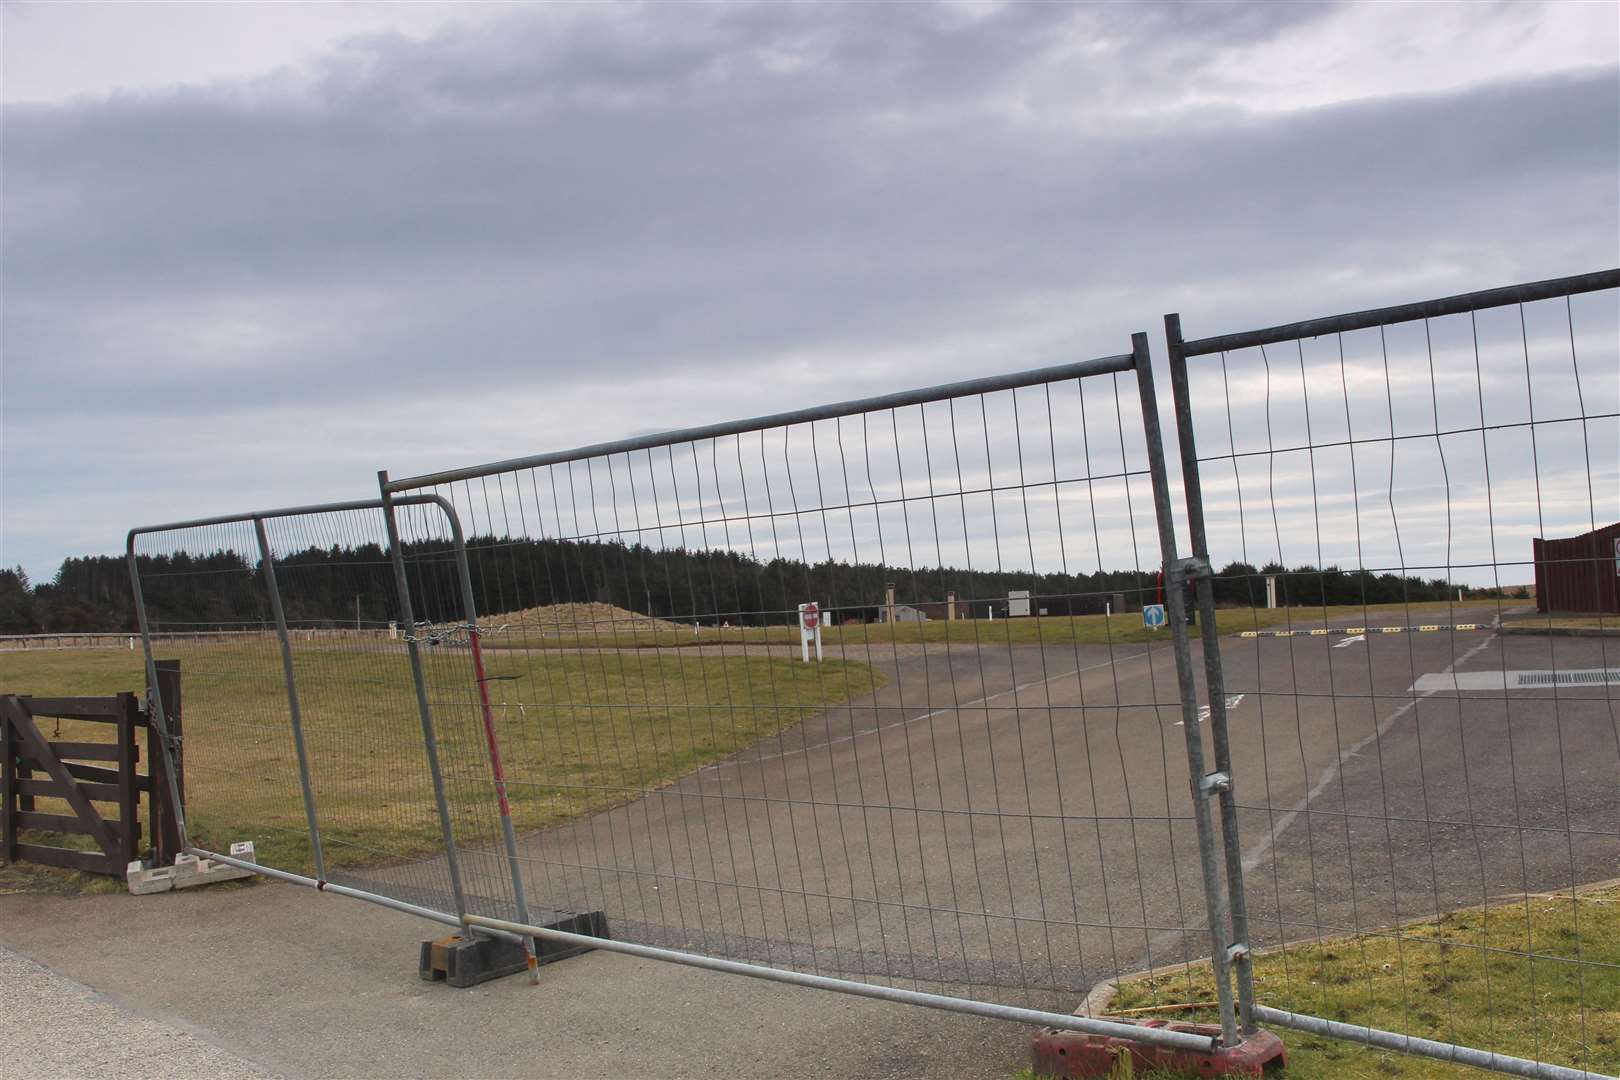 Locked gates at the Caravan and Motorhome Club's site at Dunnet Bay on Sunday. The site would have been due to open for the season on March 20. Picture: Alan Hendry